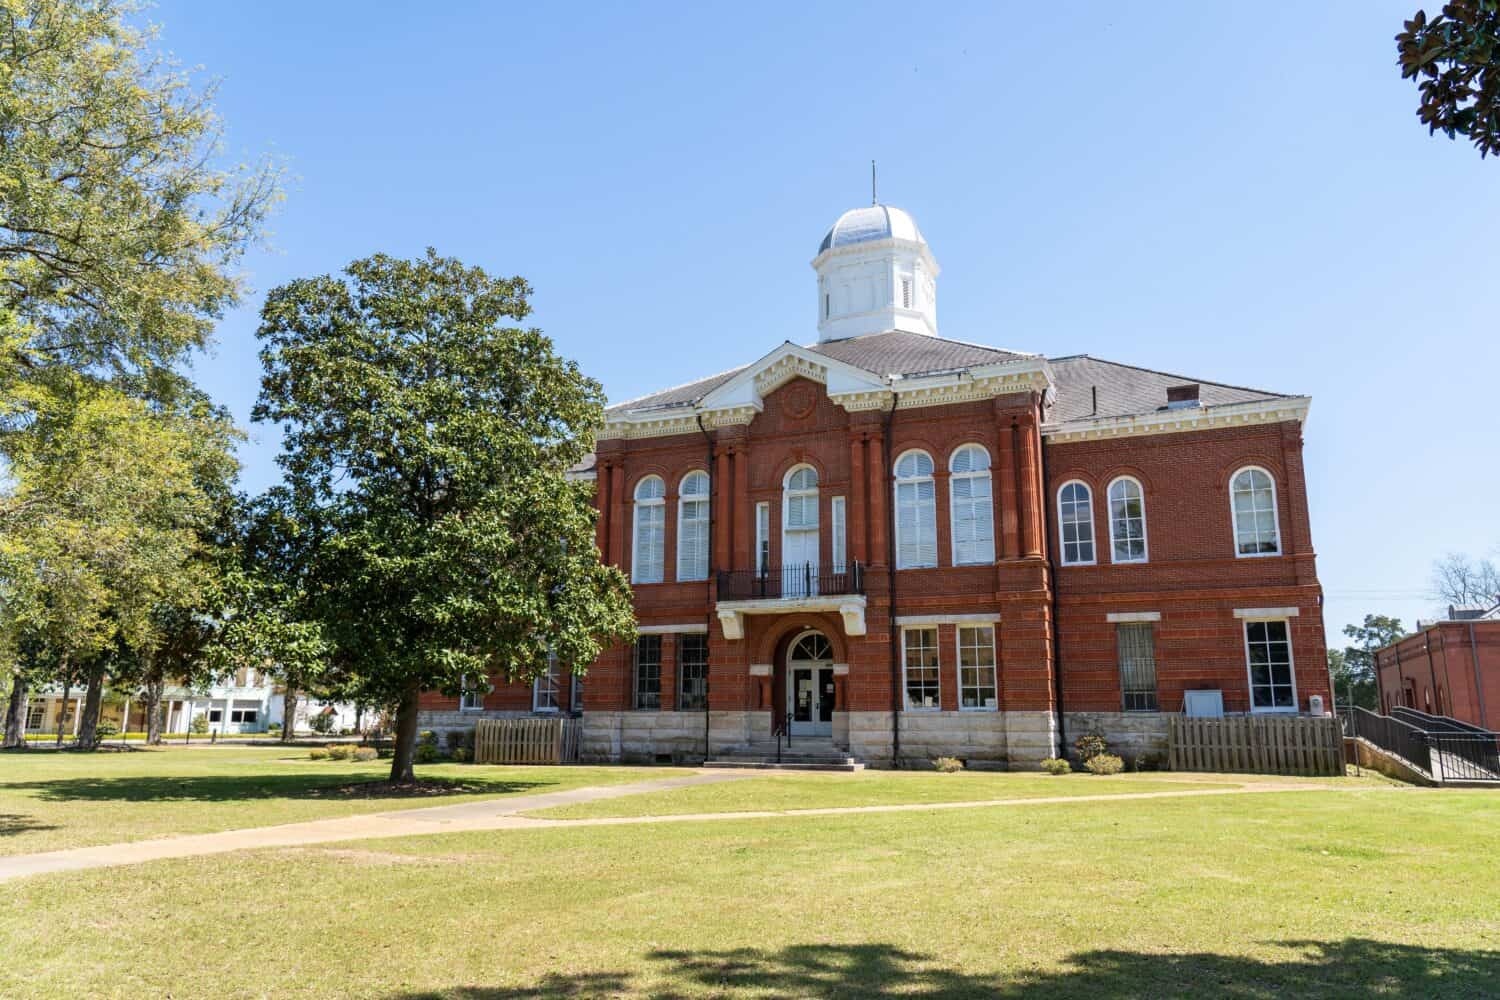 Livingston, AL - April 2021: Sumter County Courthouse in Livingston, Alabama.